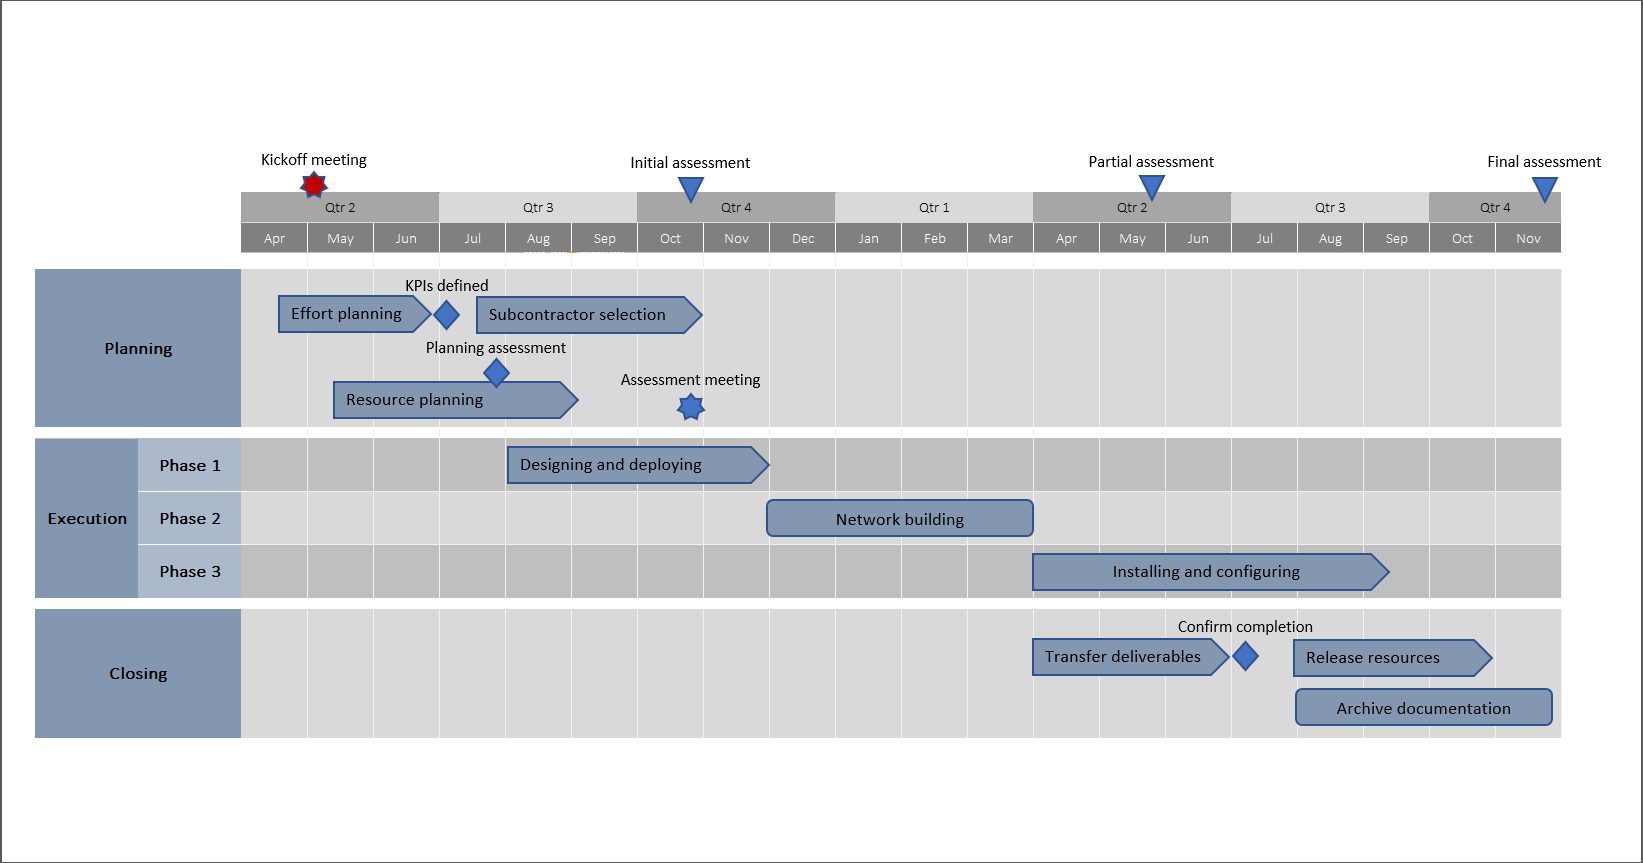 Manually-made Excel roadmap